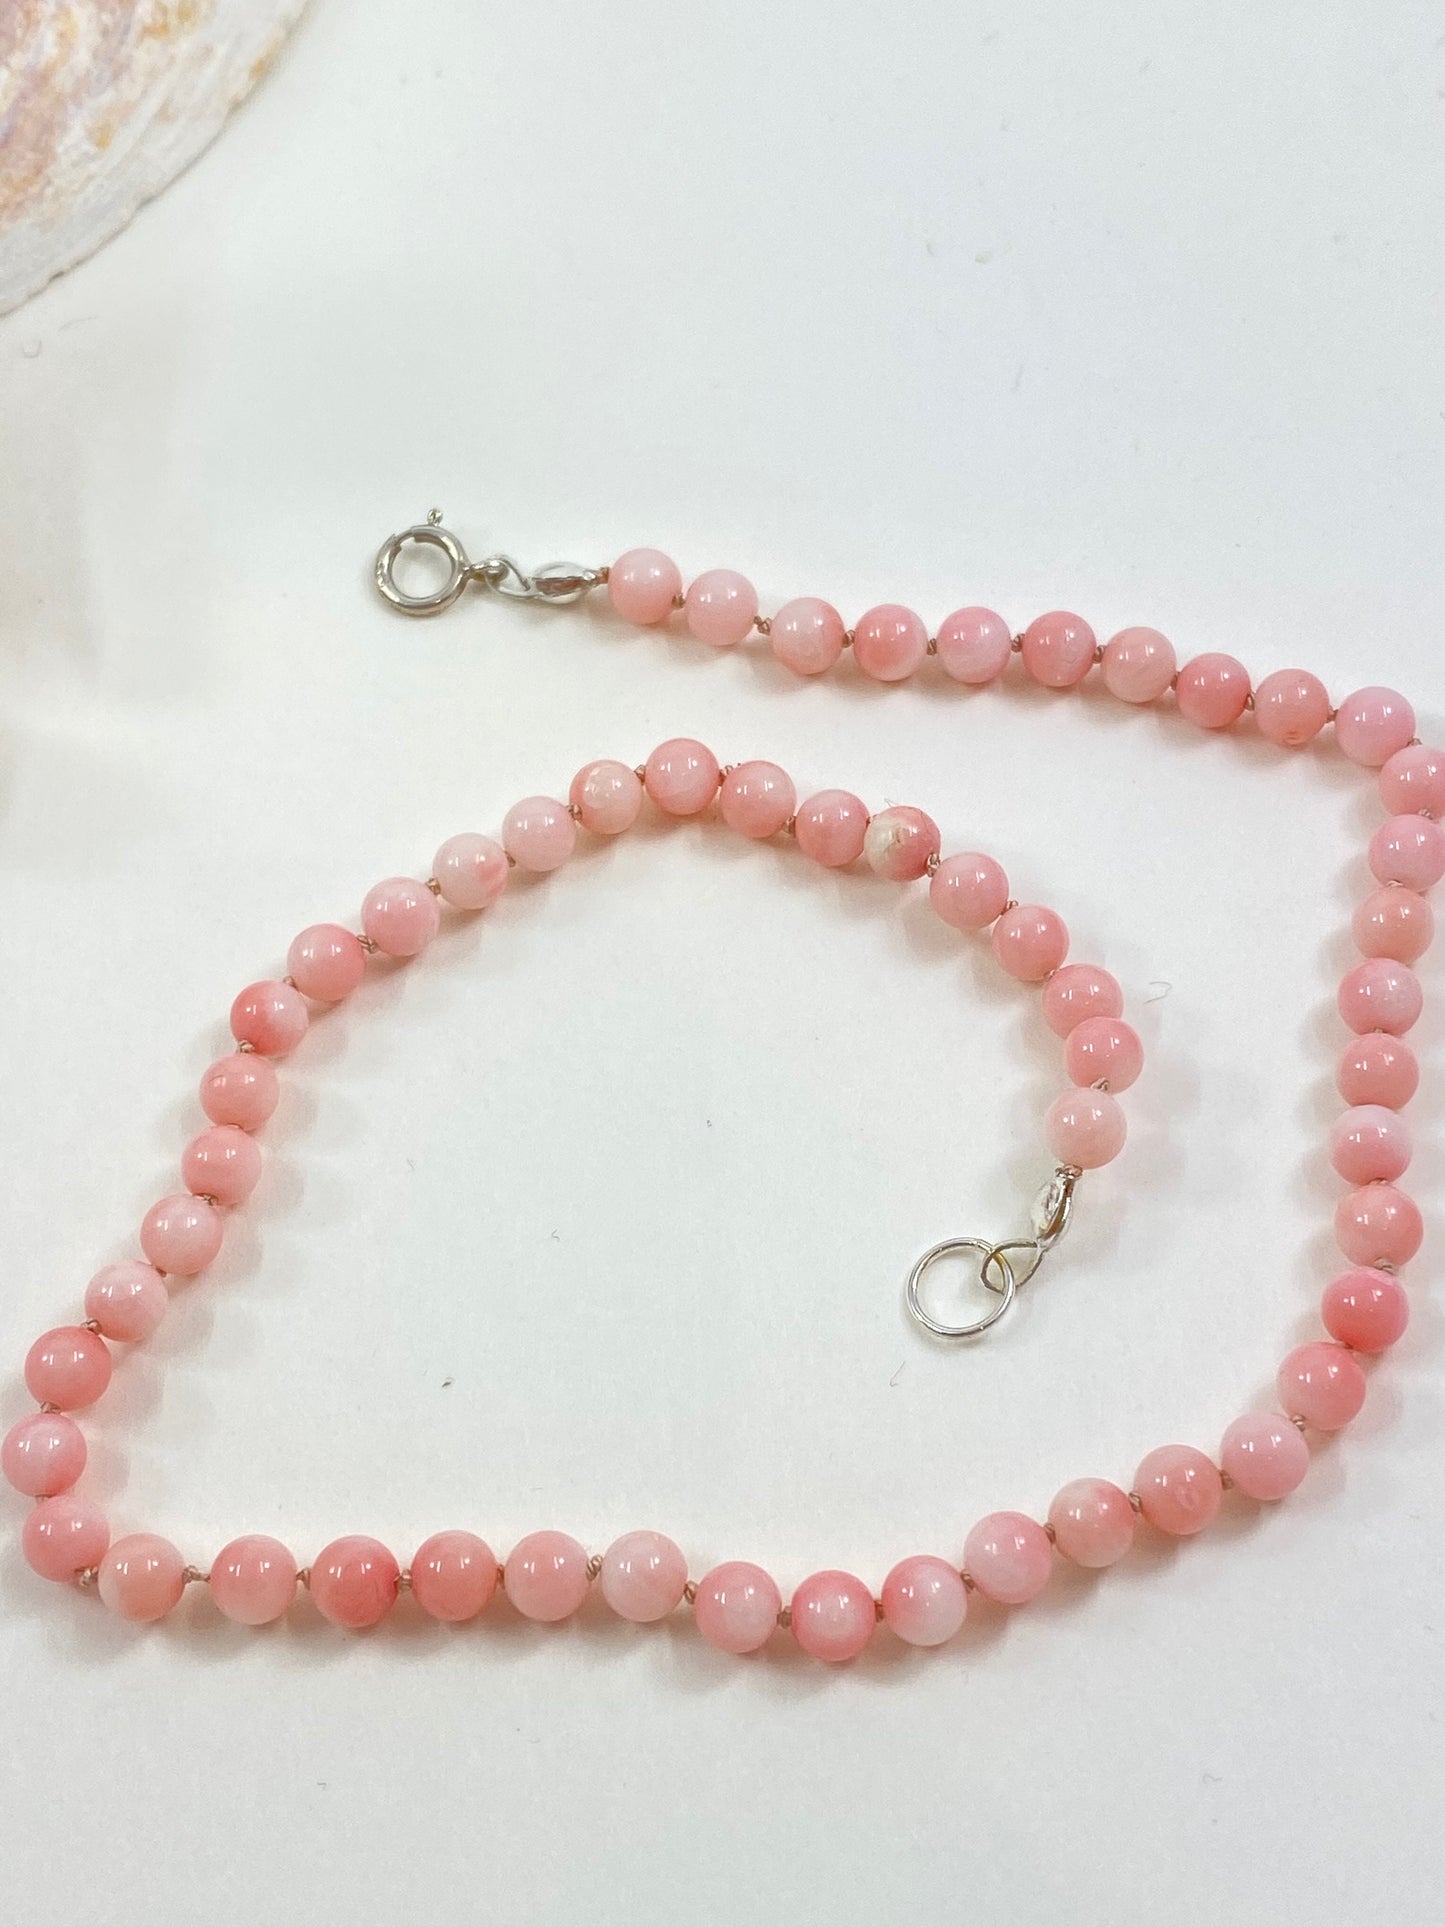 The sweetest girl's coral agate beaded necklace. Knotted for safety and styled for fun.